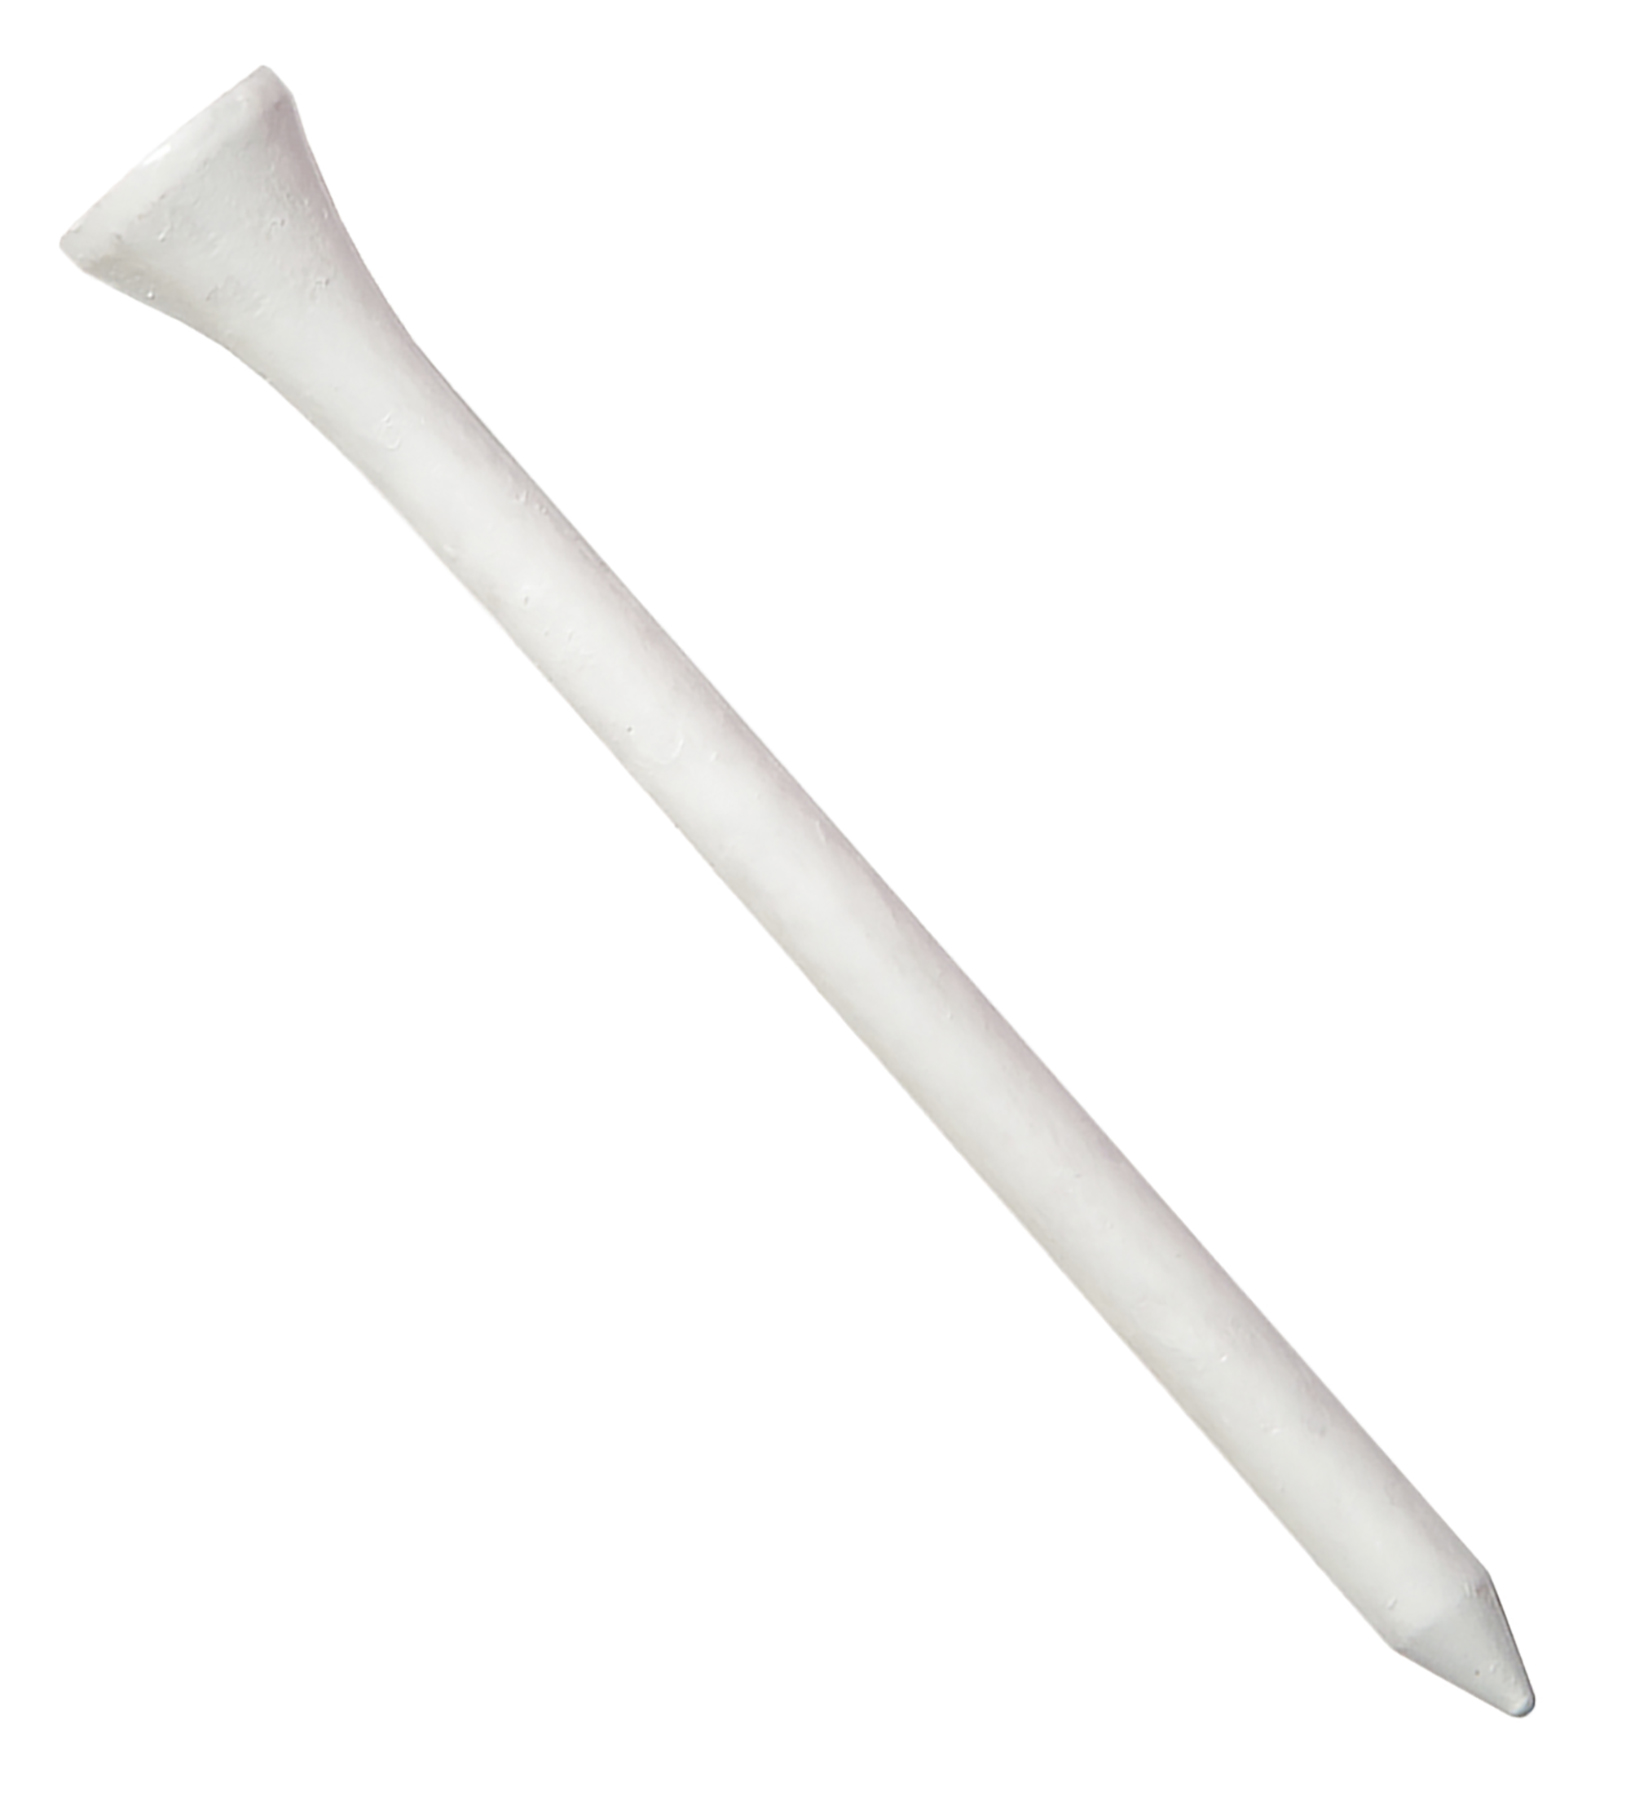 Pride Wood Golf Tee, 3-1/4 inch, White, 90 Count - image 4 of 6